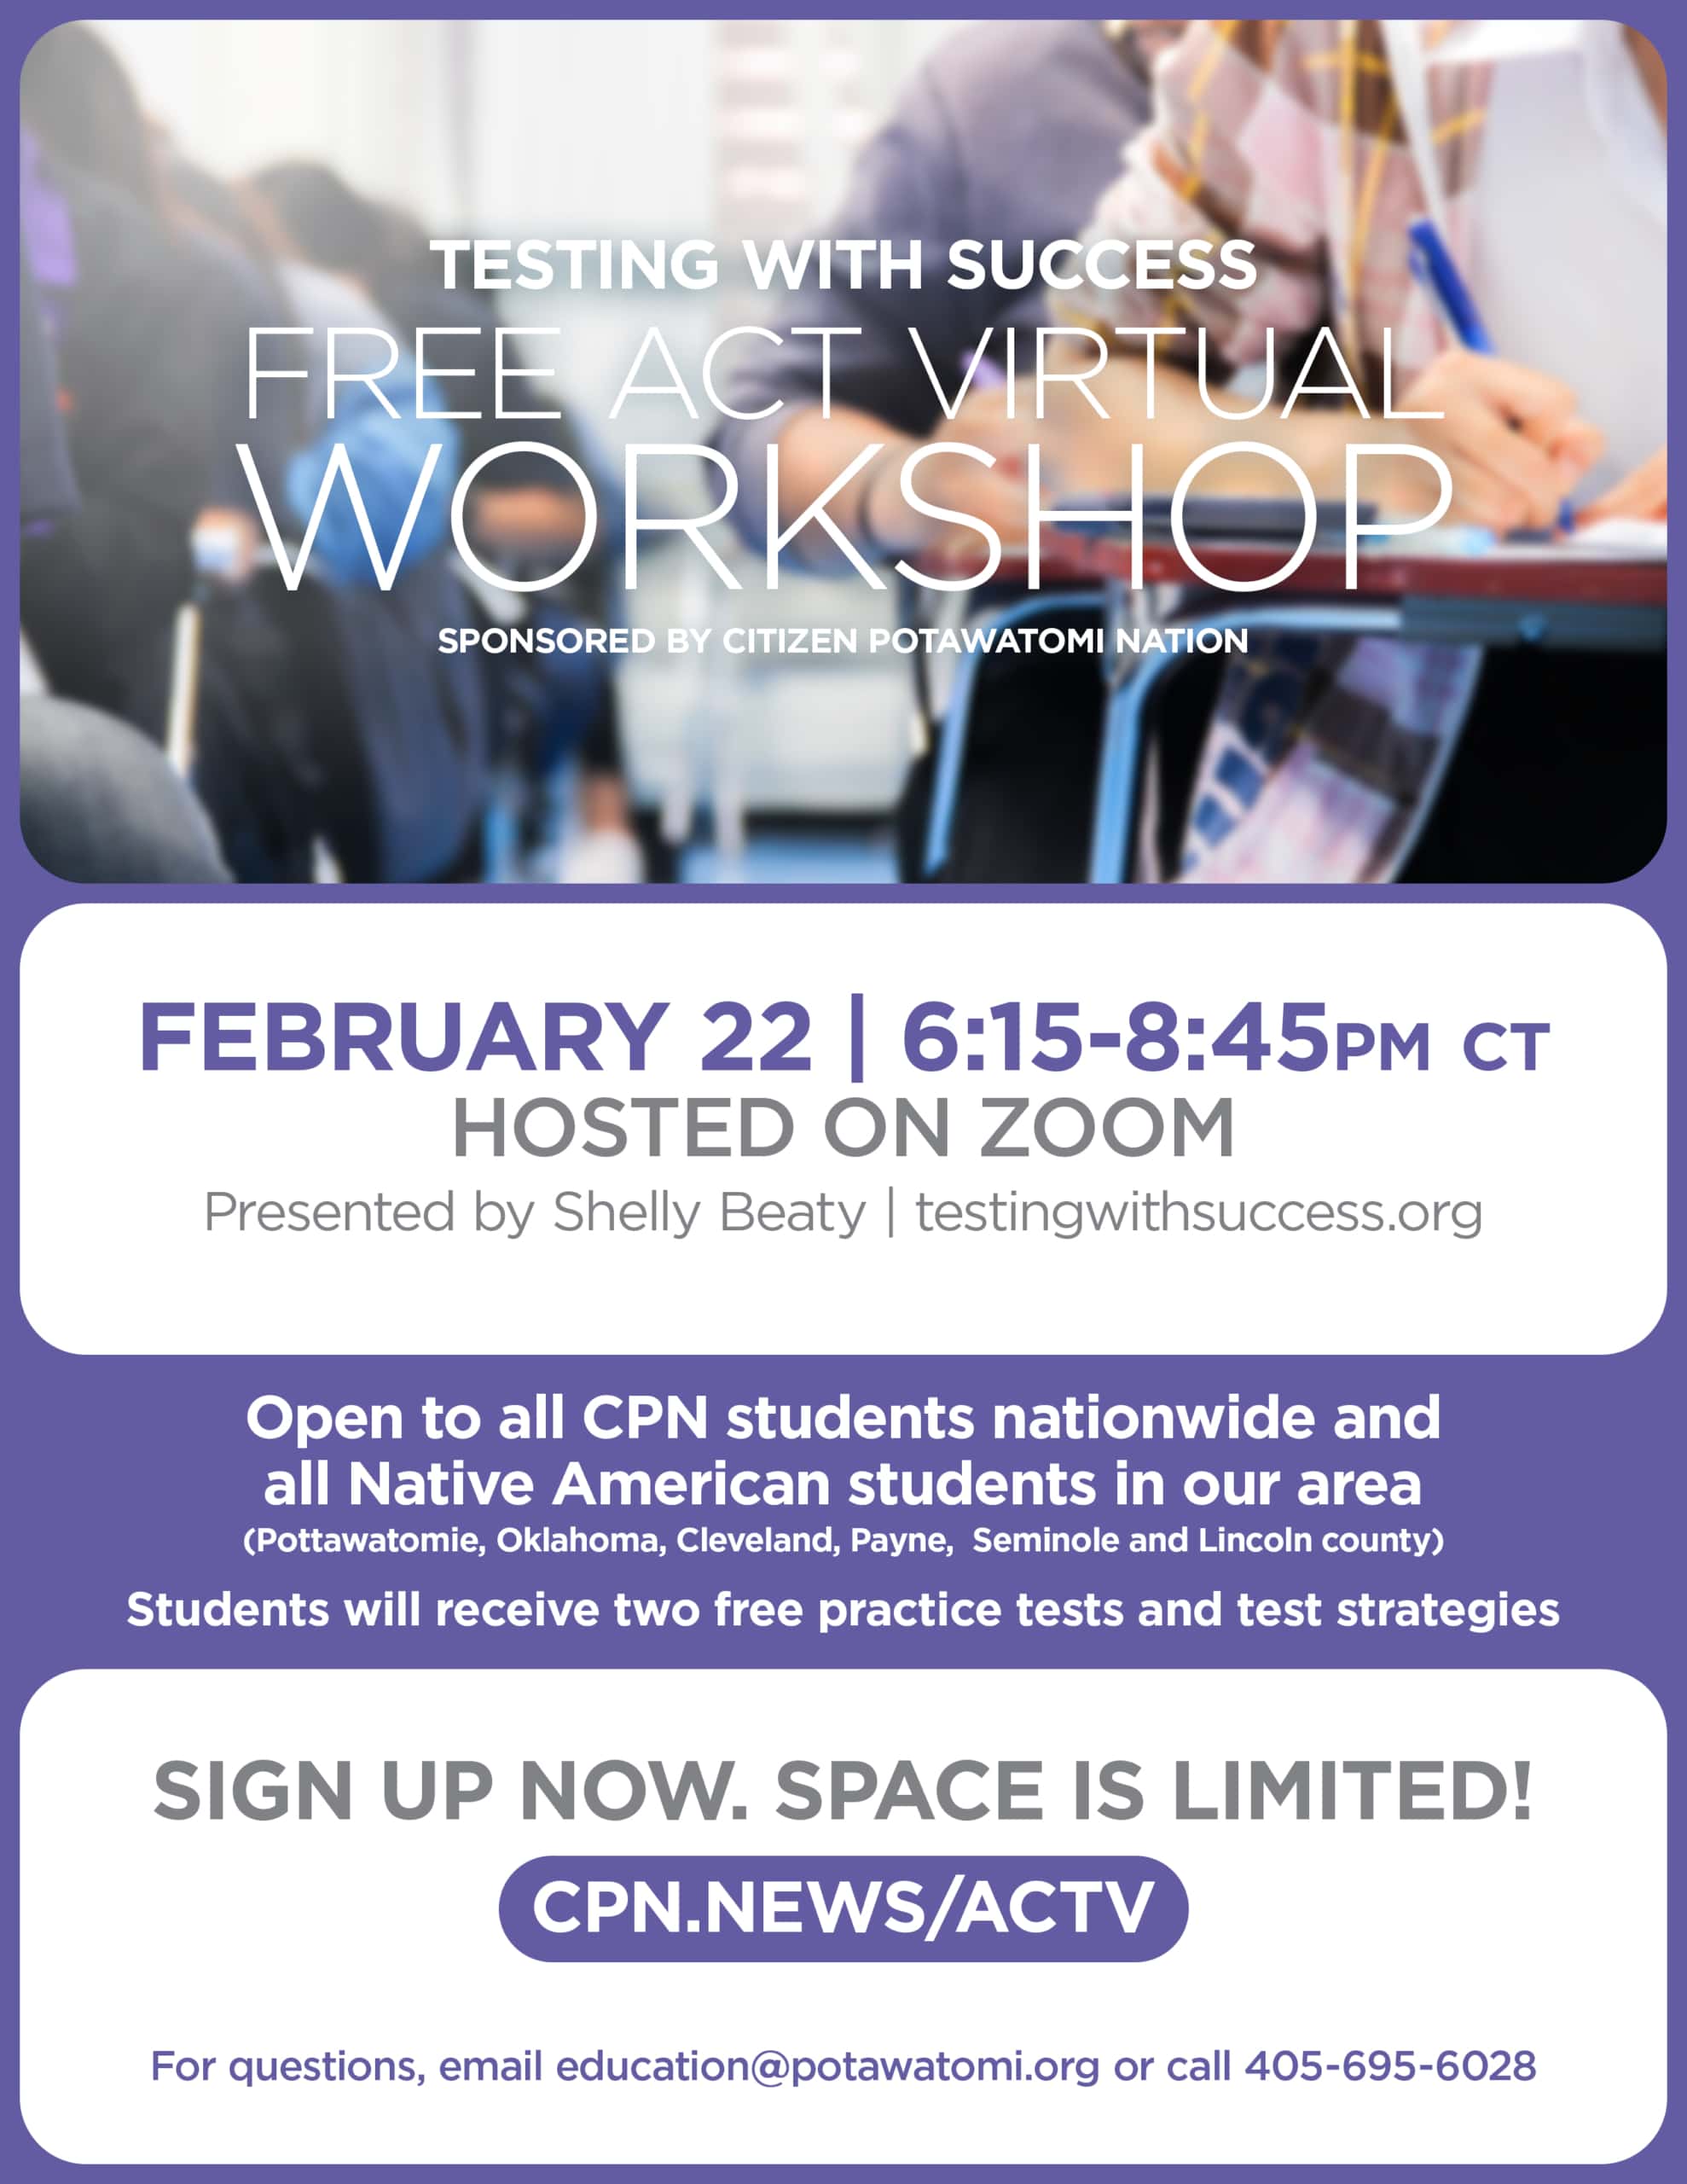 Purple flyer with a stock photo of students taking tests advertises the free virtual ACT workshop open to Citizen Potawatomi Nation students nationwide and Native American students in the CPN area on February 22, 2023. Register at cpn.news/actv.